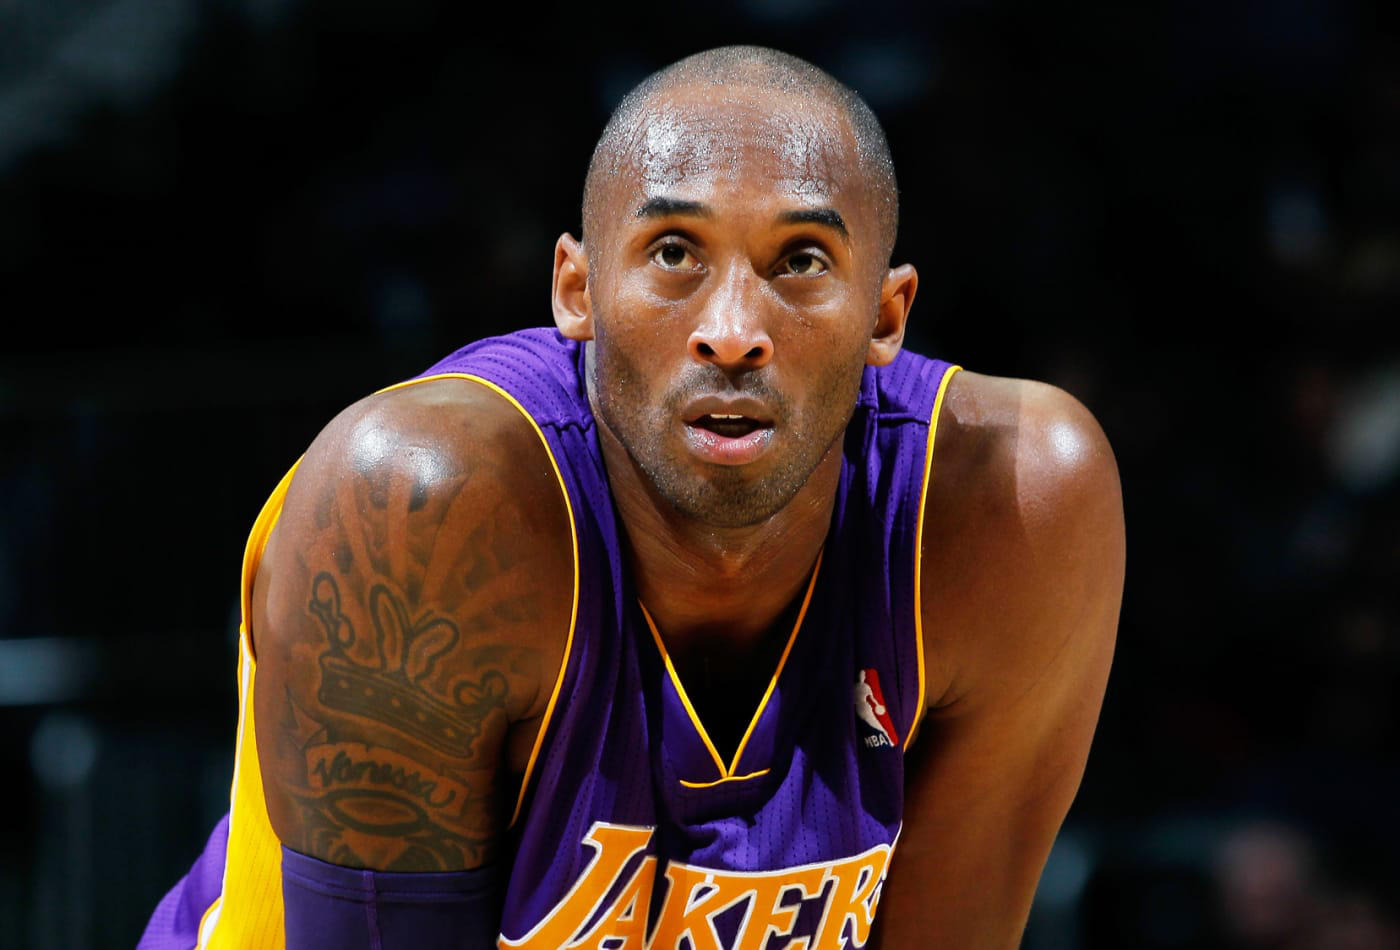 Us Basketball Legend Kobe Bryant His Daughter Killed In Helicopter Crash